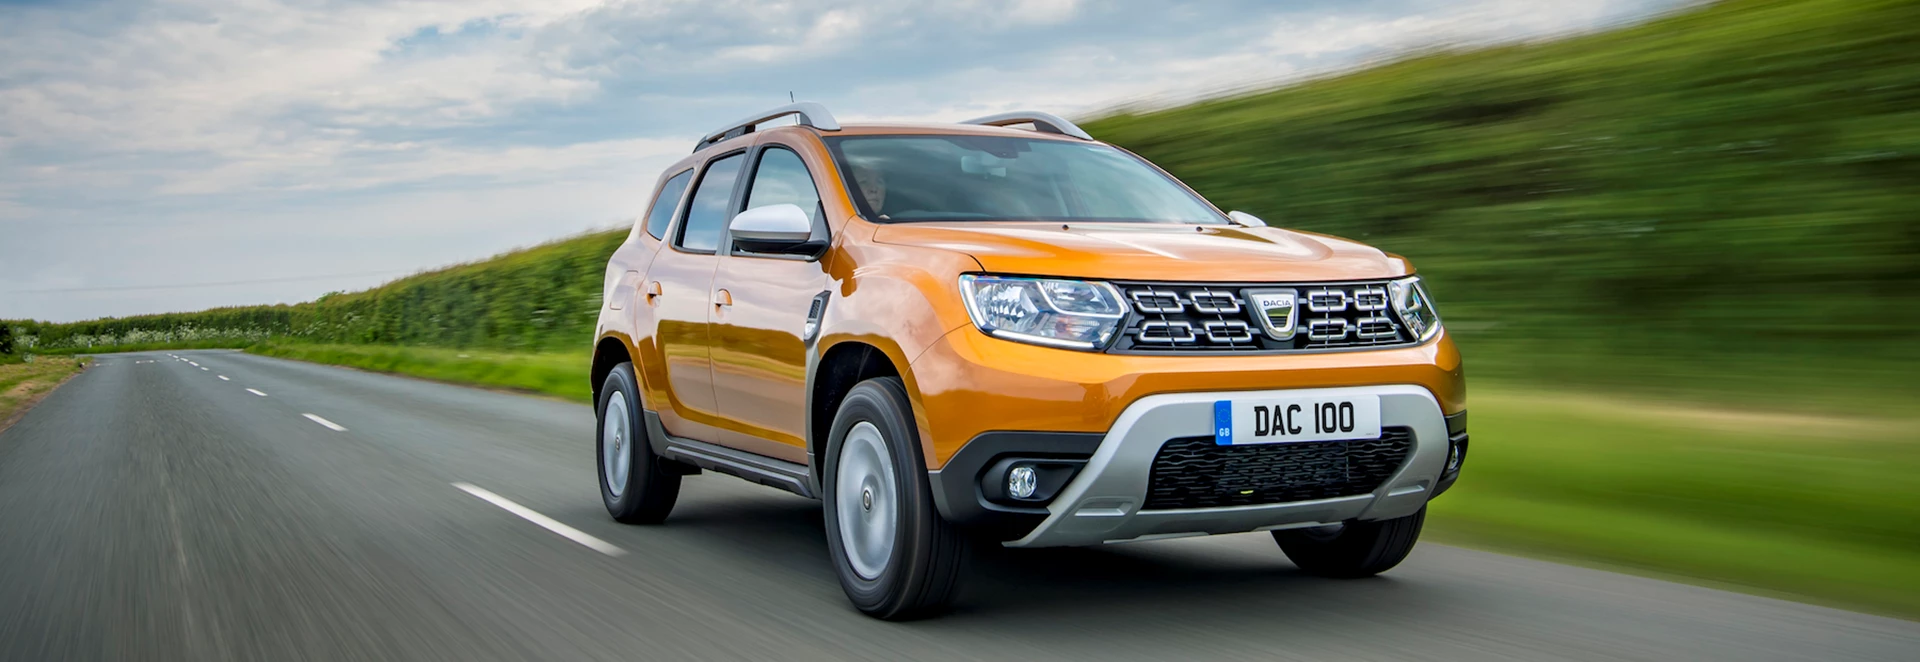 Dacia Duster gains a new entry-level engine option